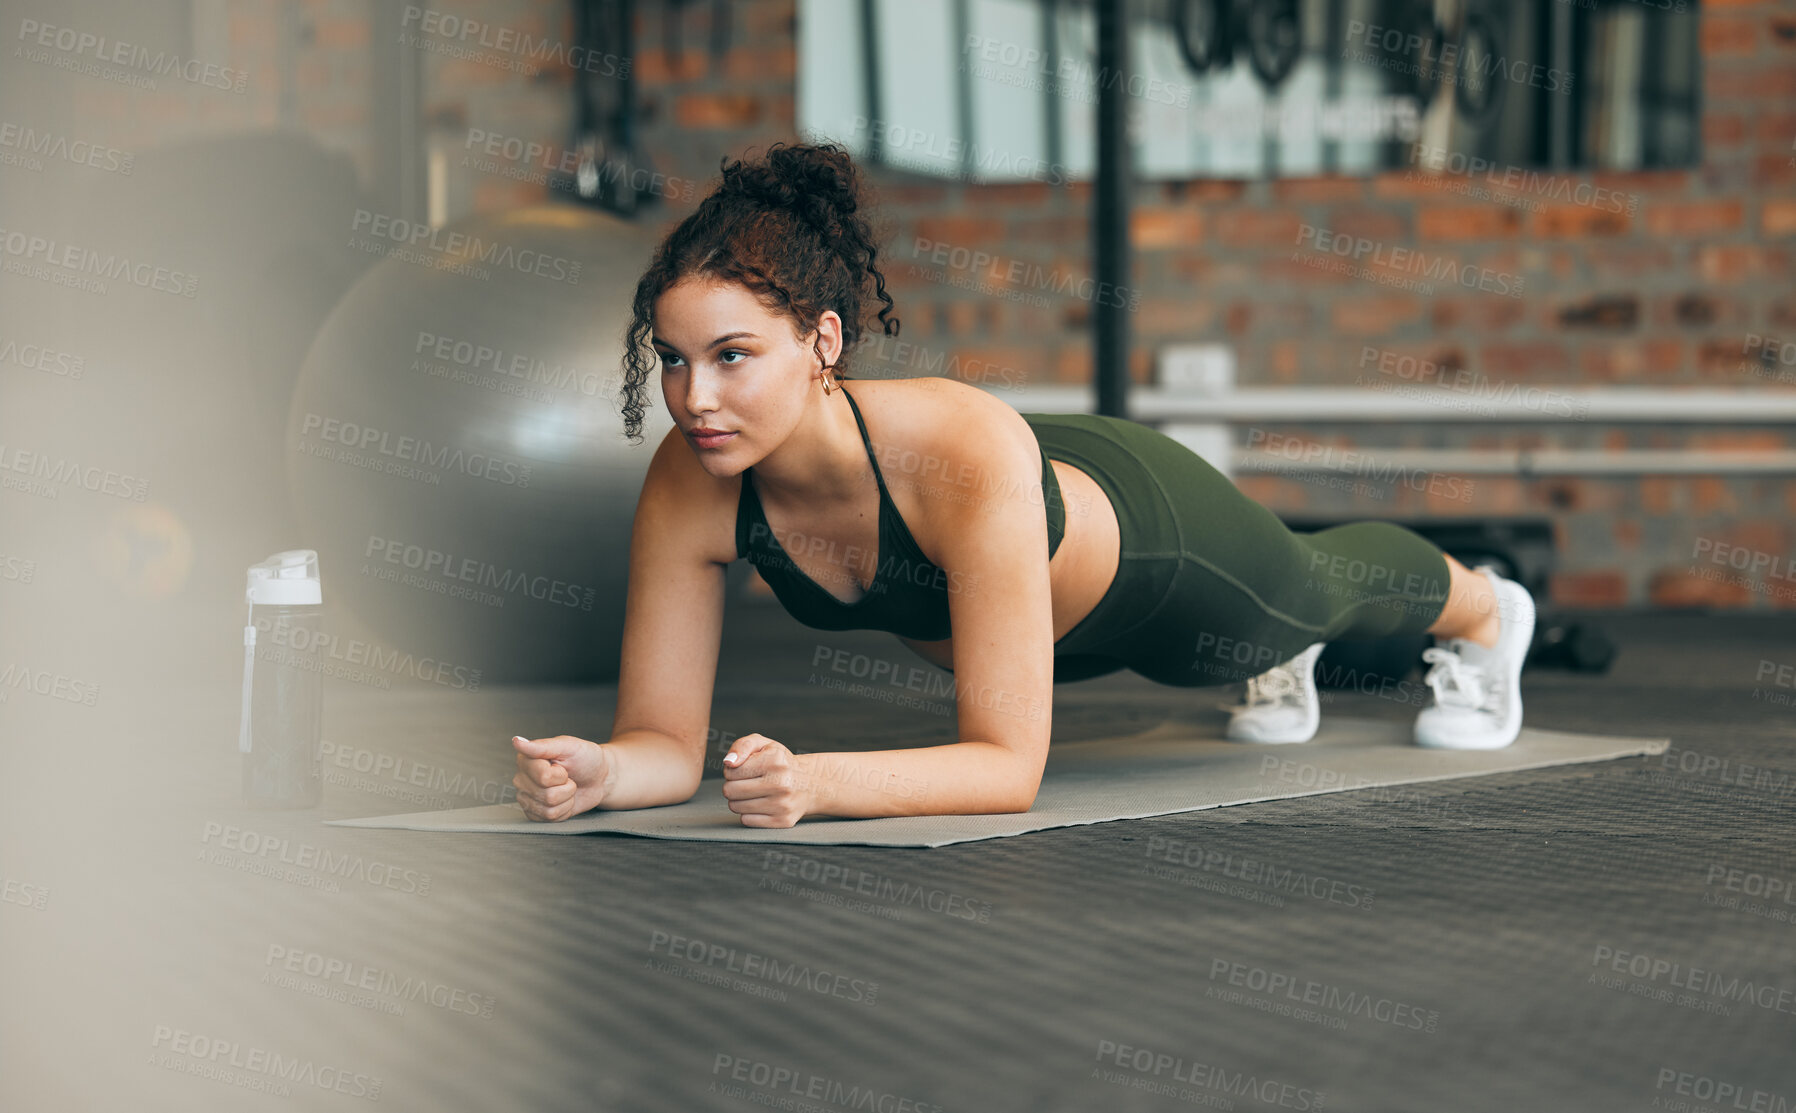 Buy stock photo Fitness, gym and workout of a woman doing plank exercise or training for wellness with focus for healthy lifestyle. Female athlete with body weight routine for strong core, sports health and balance